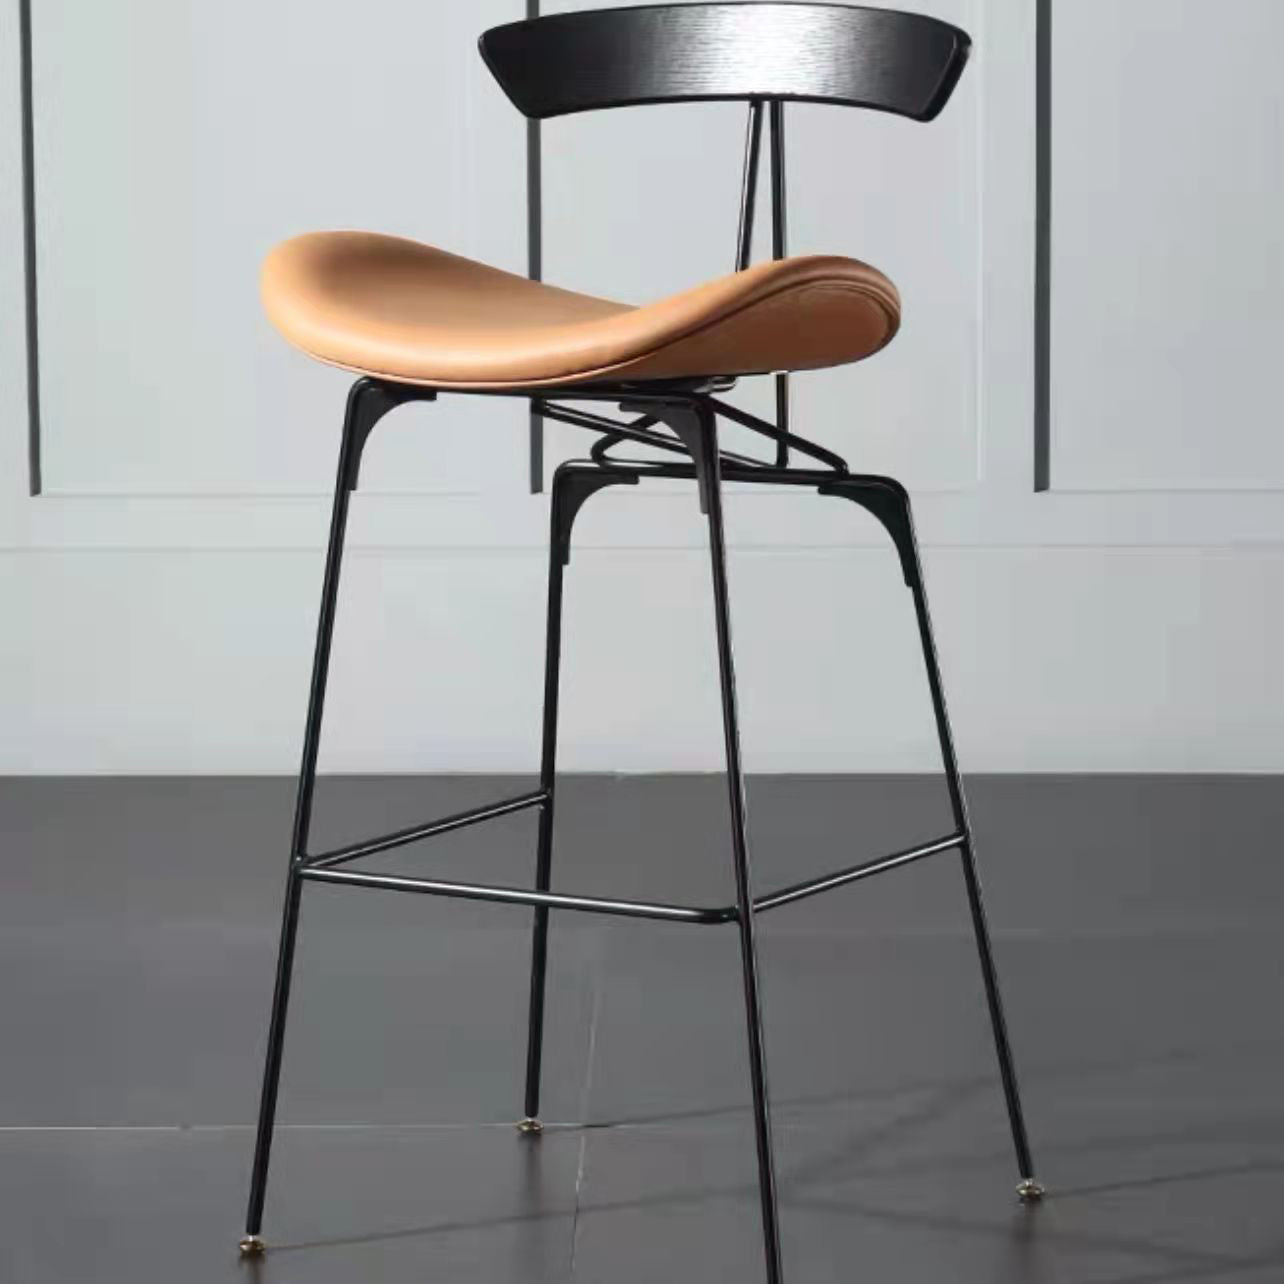 Leather Contoured Seat Barstool Industrial Metal Counter Stool with Backrest 1 Piece